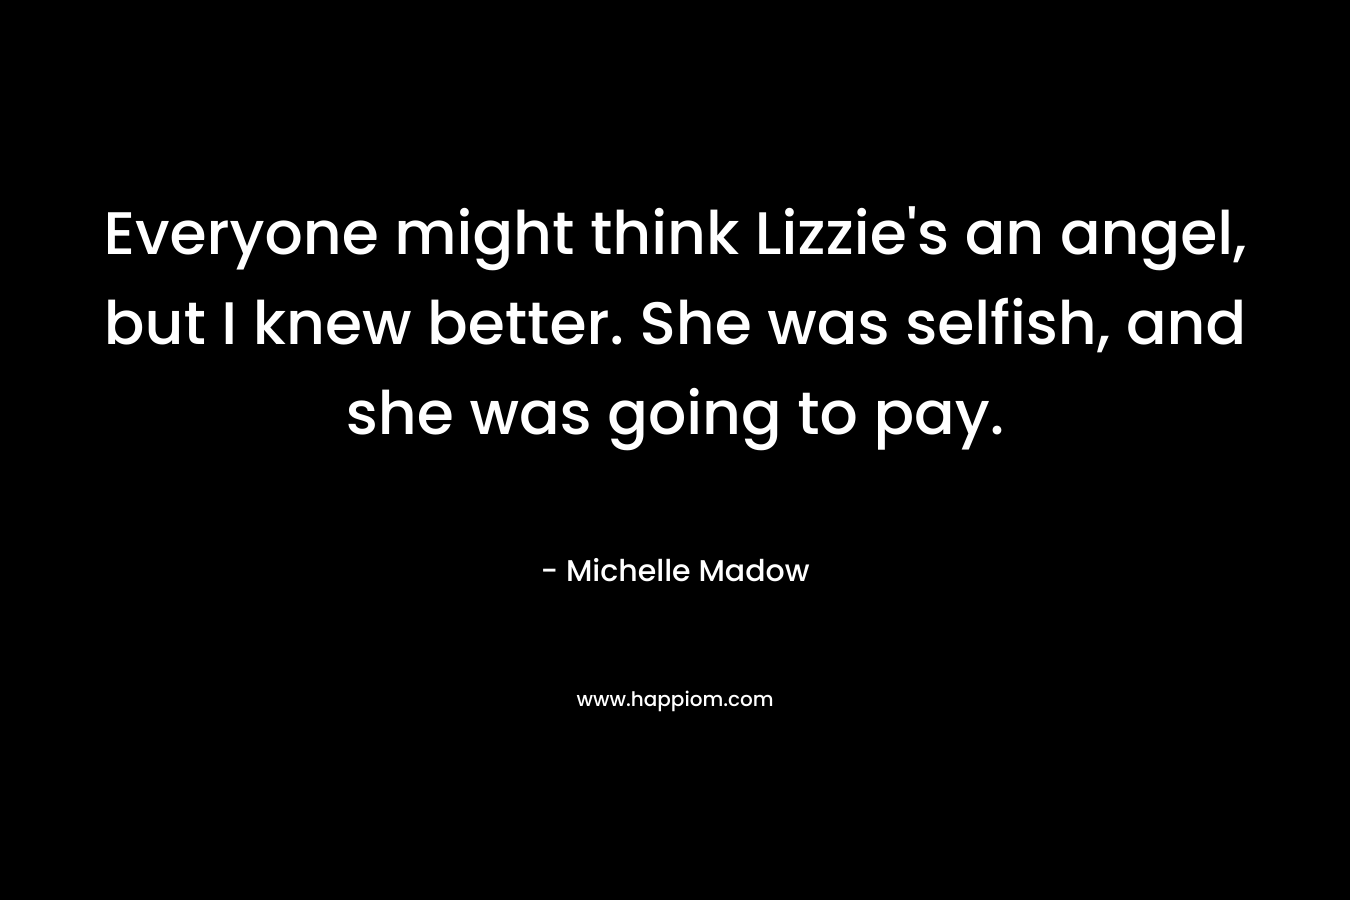 Everyone might think Lizzie’s an angel, but I knew better. She was selfish, and she was going to pay. – Michelle Madow